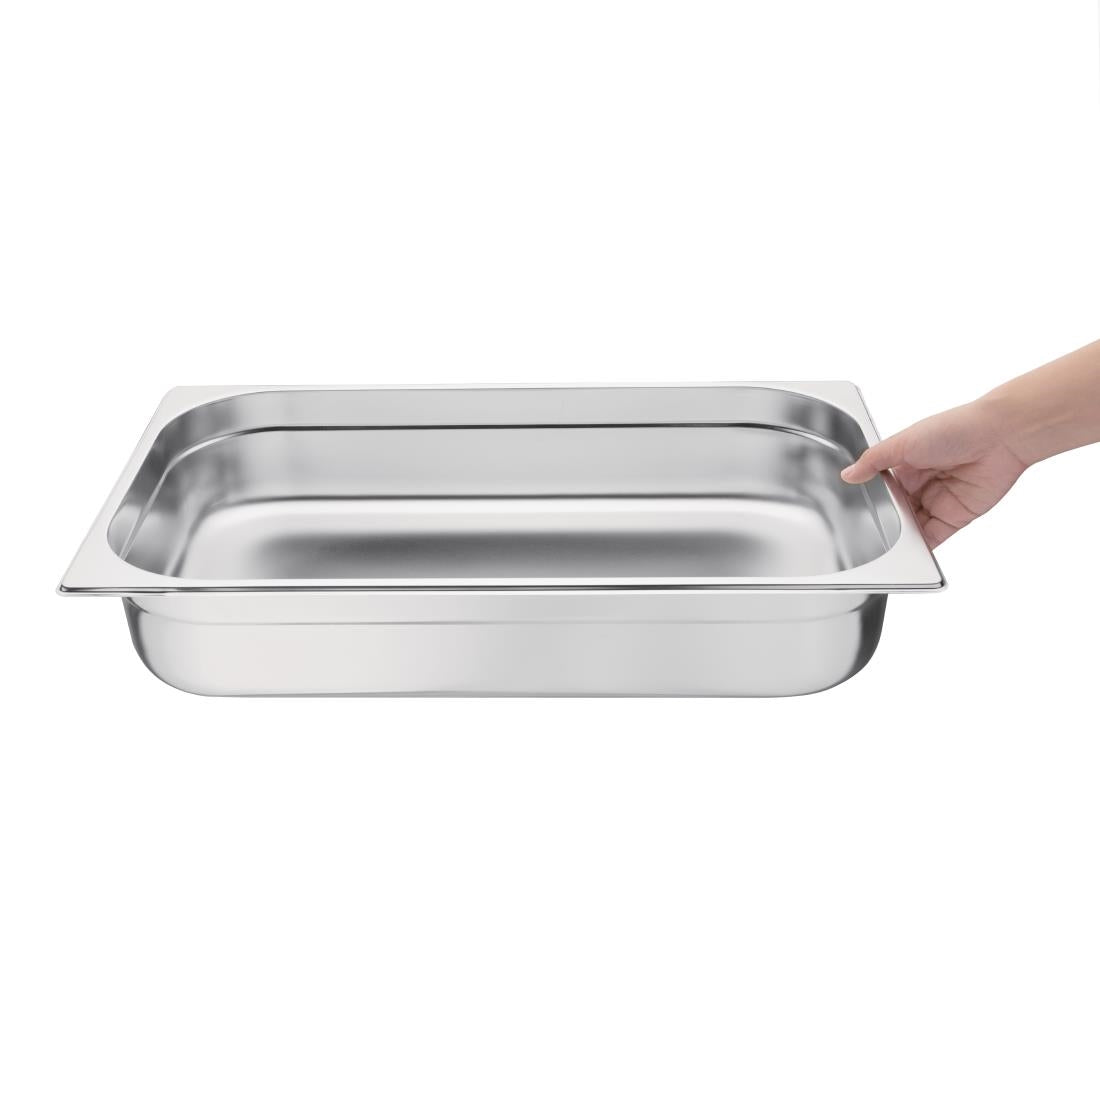 K923 Vogue Stainless Steel 1/1 Gastronorm Pan 100mm JD Catering Equipment Solutions Ltd